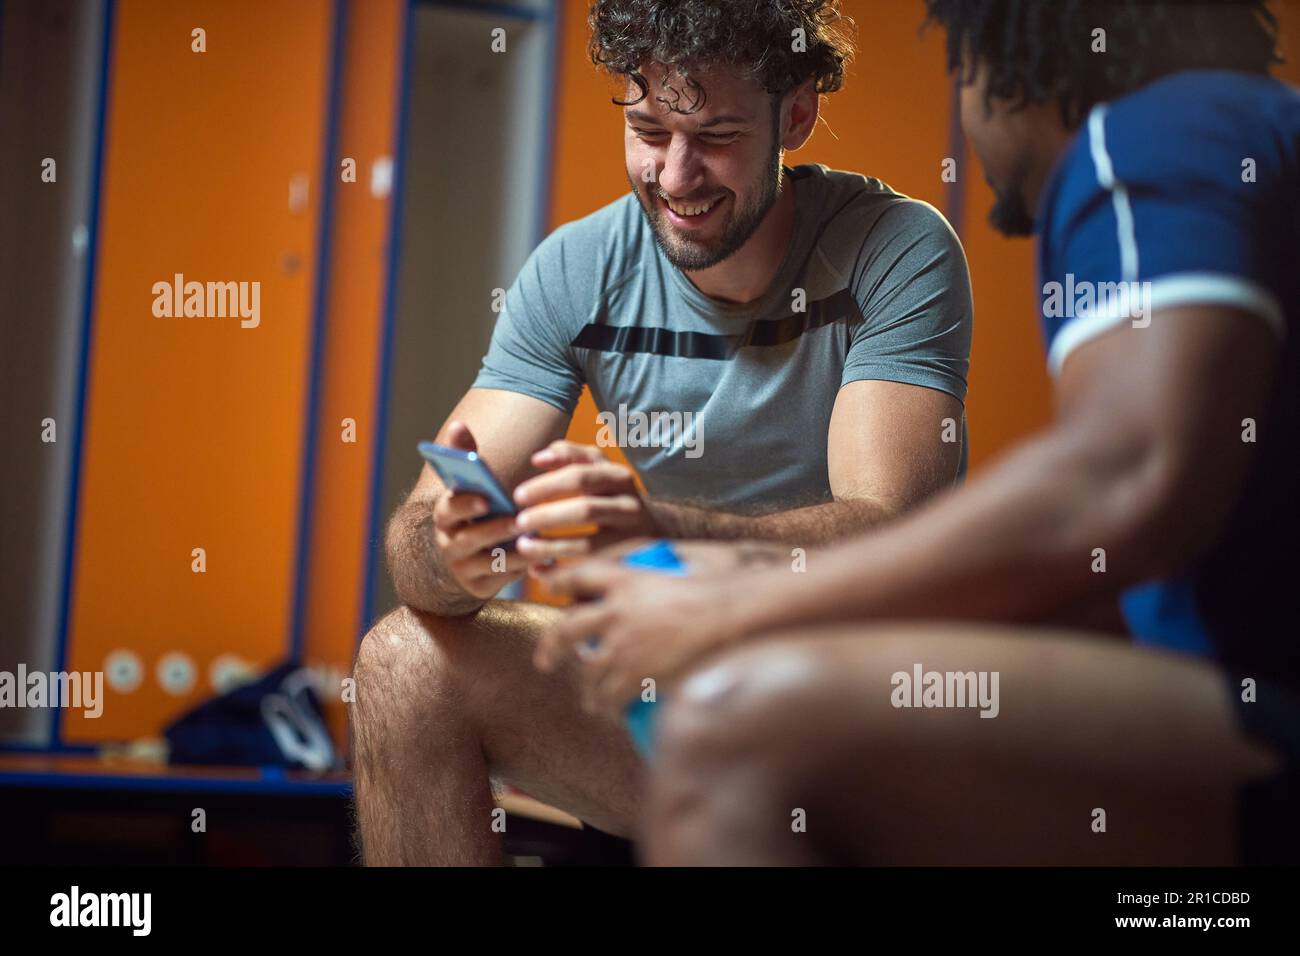 Young man using mobile phone with friend sitting on bench in the gym locker room, having fun before workout. Sports, health, togetherness concept. Stock Photo